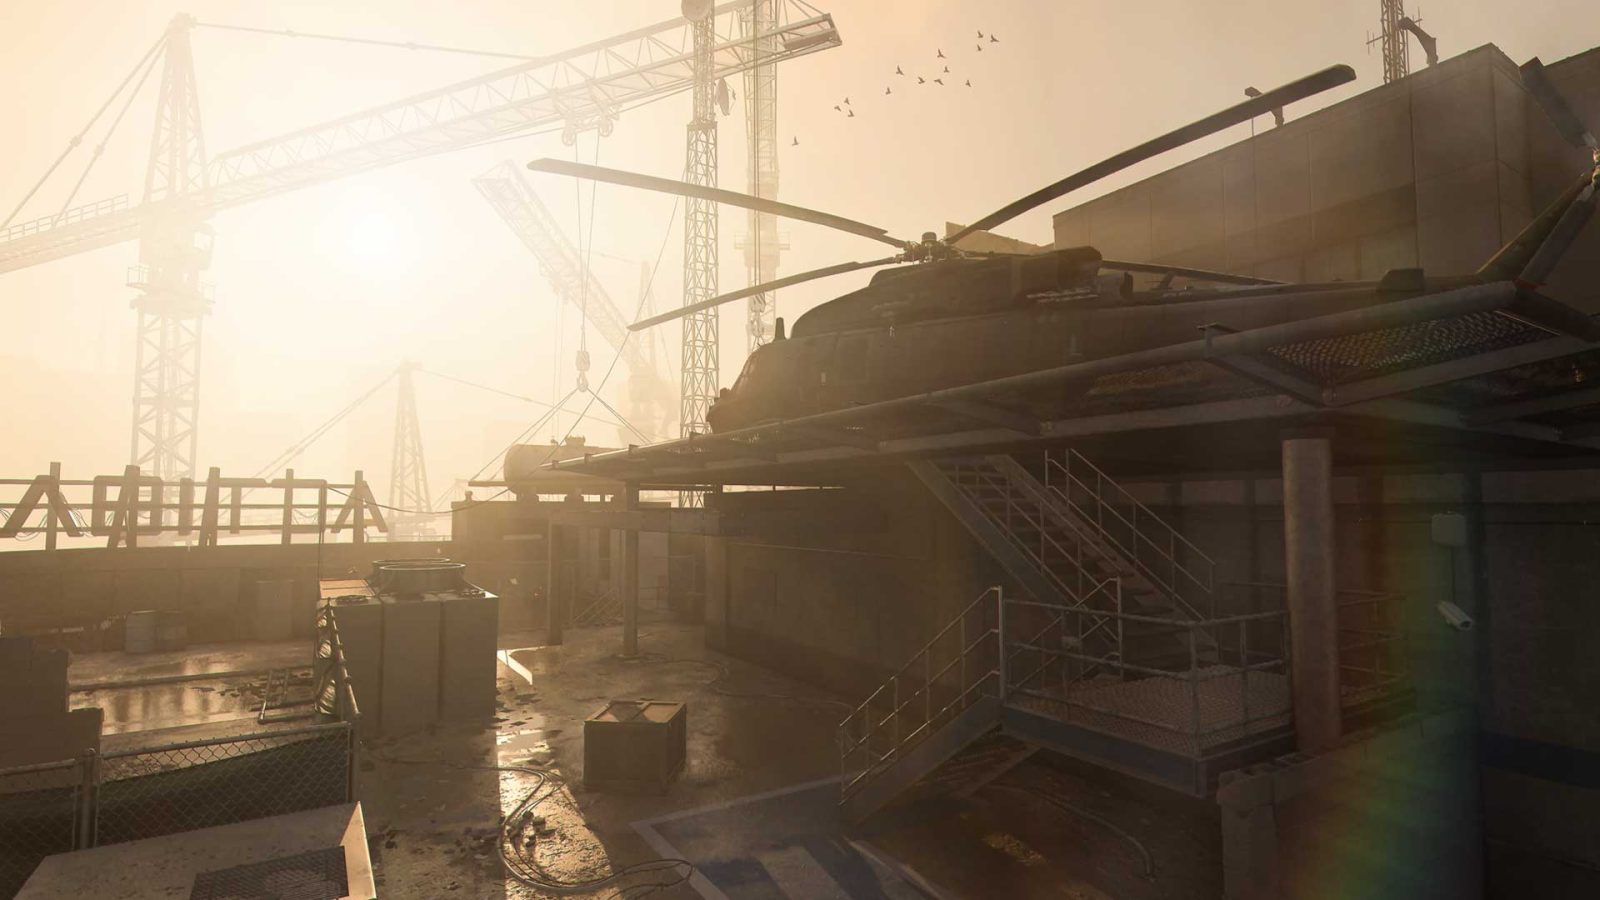 Your guide to the Call of Duty: Modern Warfare III beta, starting October  6th — GAMINGTREND